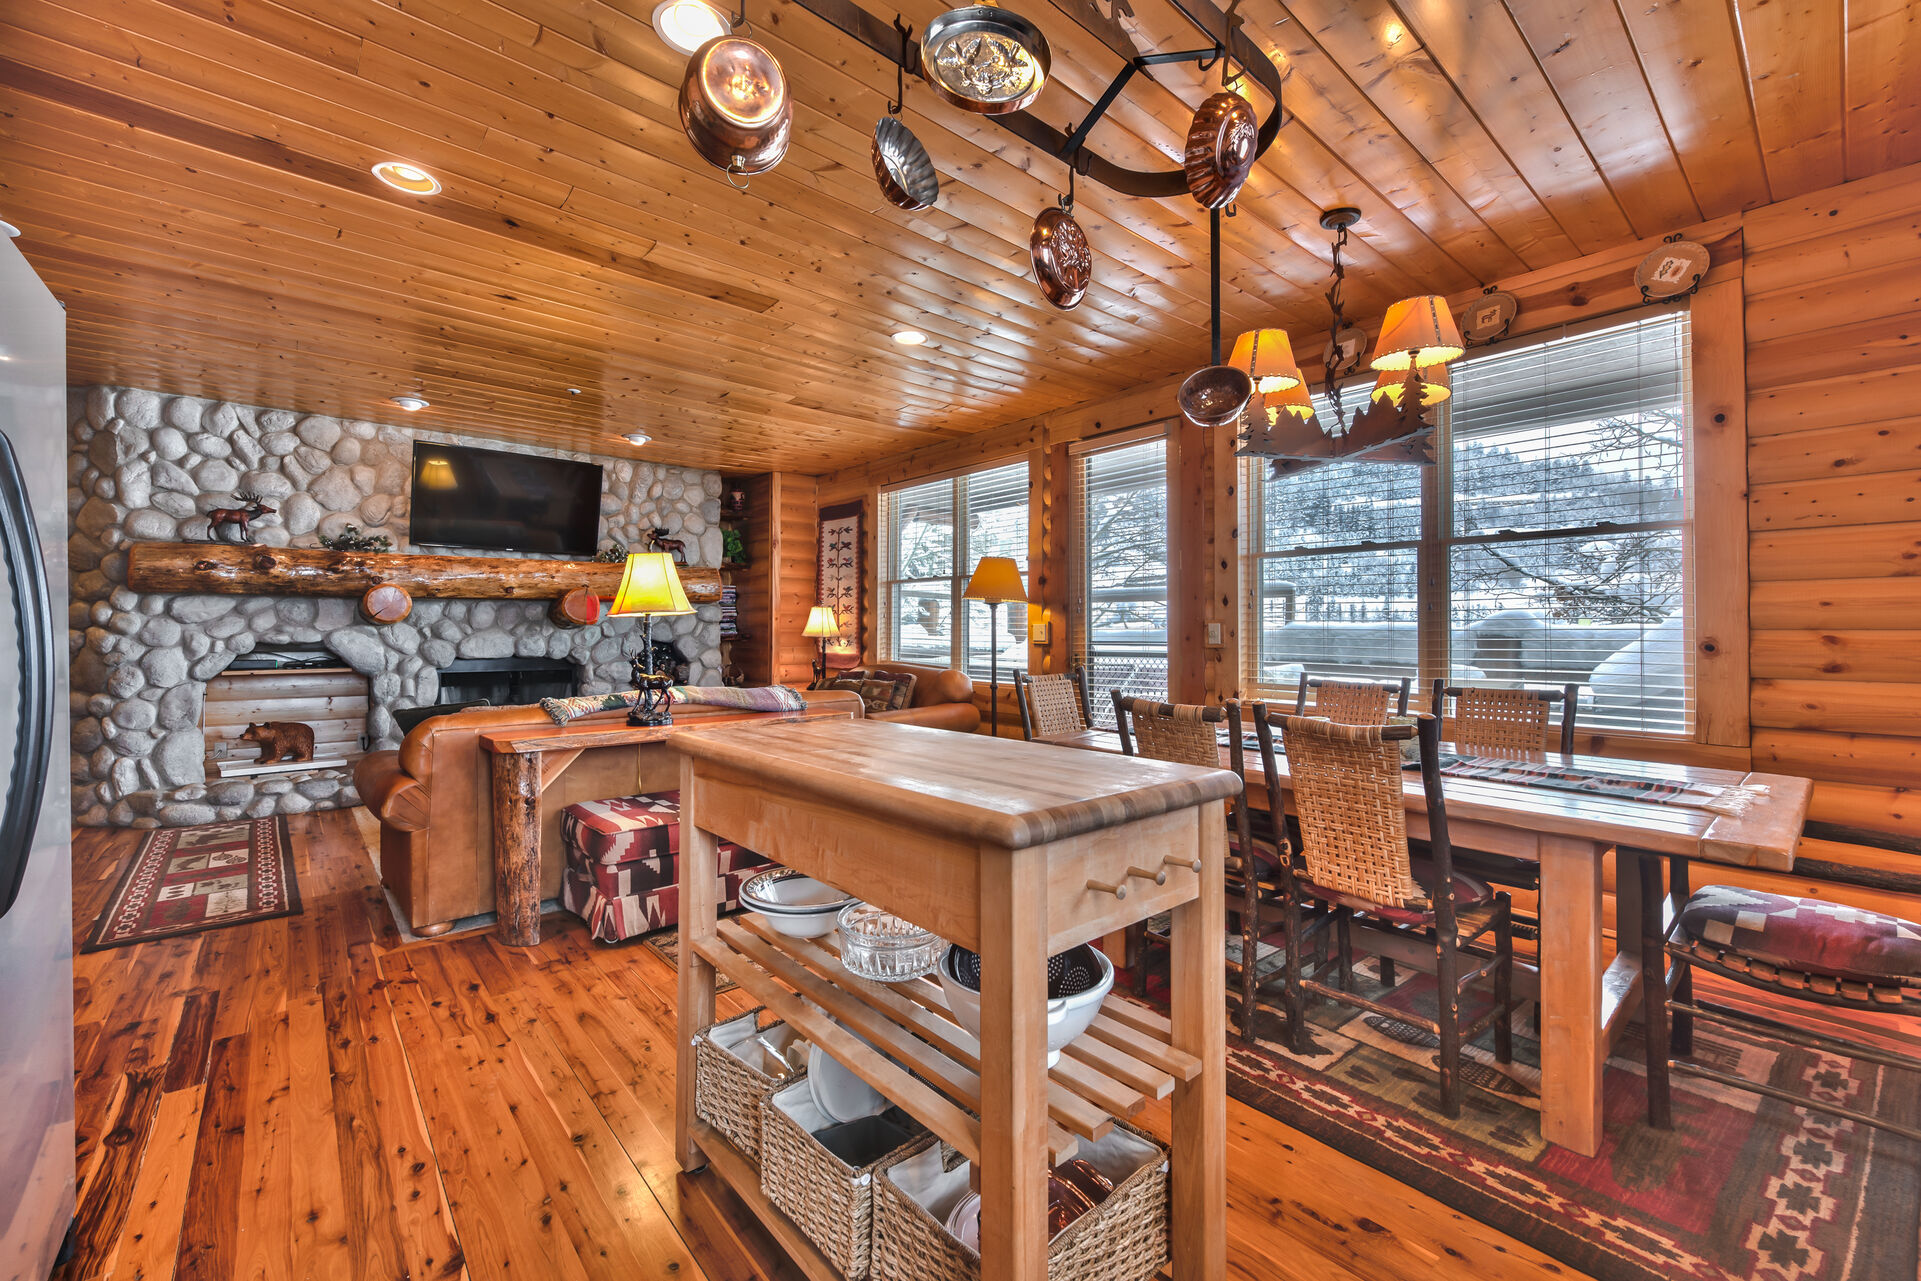 Fully Equipped Kitchen with Butcher-Block Island, Dining Area with Seating for 6, Private Deck with BBQ, Patio Seating and Hot Tub